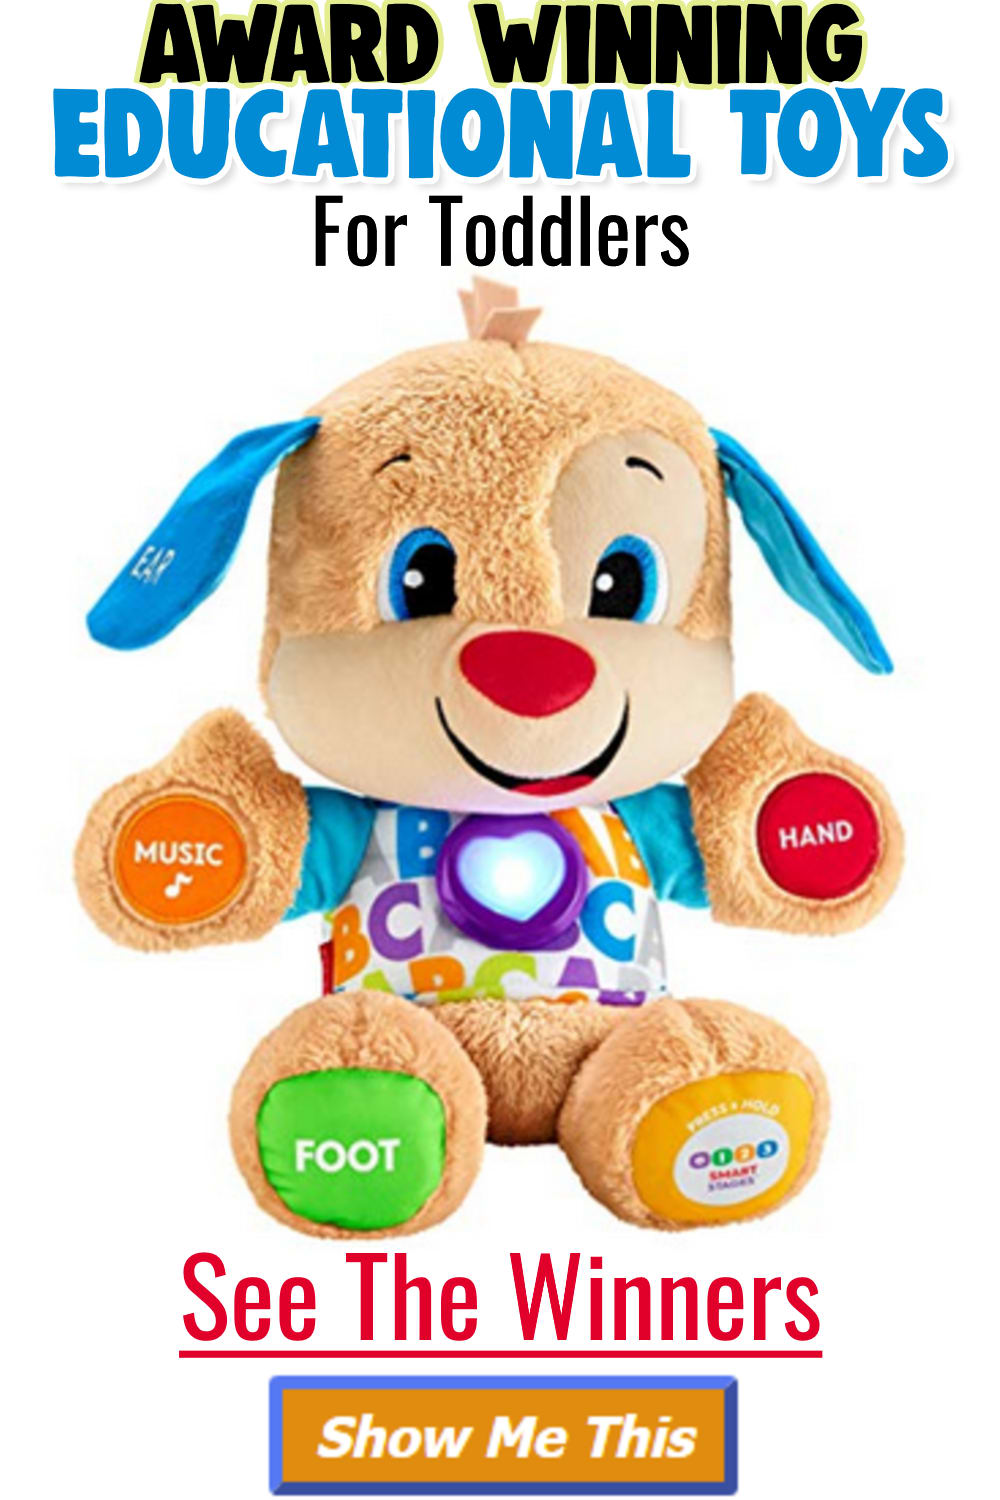 Award Winning Toys For Toddlers - Best Educational Toys and Learning Toys for Toddlers Age 1, 2, 3, and 4-5 year olds.  This Fisher Price Laugh and Learn Puppy is one of the best educational toys to 1 year old and our favorite award winning toys 2 year olds.  See Parents Choice toys for toddlers and more award winning toddler toys.  The Fisher Price Laugh and Learn Puppy are great toys for 1 yr old boy or girl.  See all award winning educational toys from this years Toy Awards including learning toys for toddlers, top 20 educational toys for toddlers and intellectual development toys for toddlers.